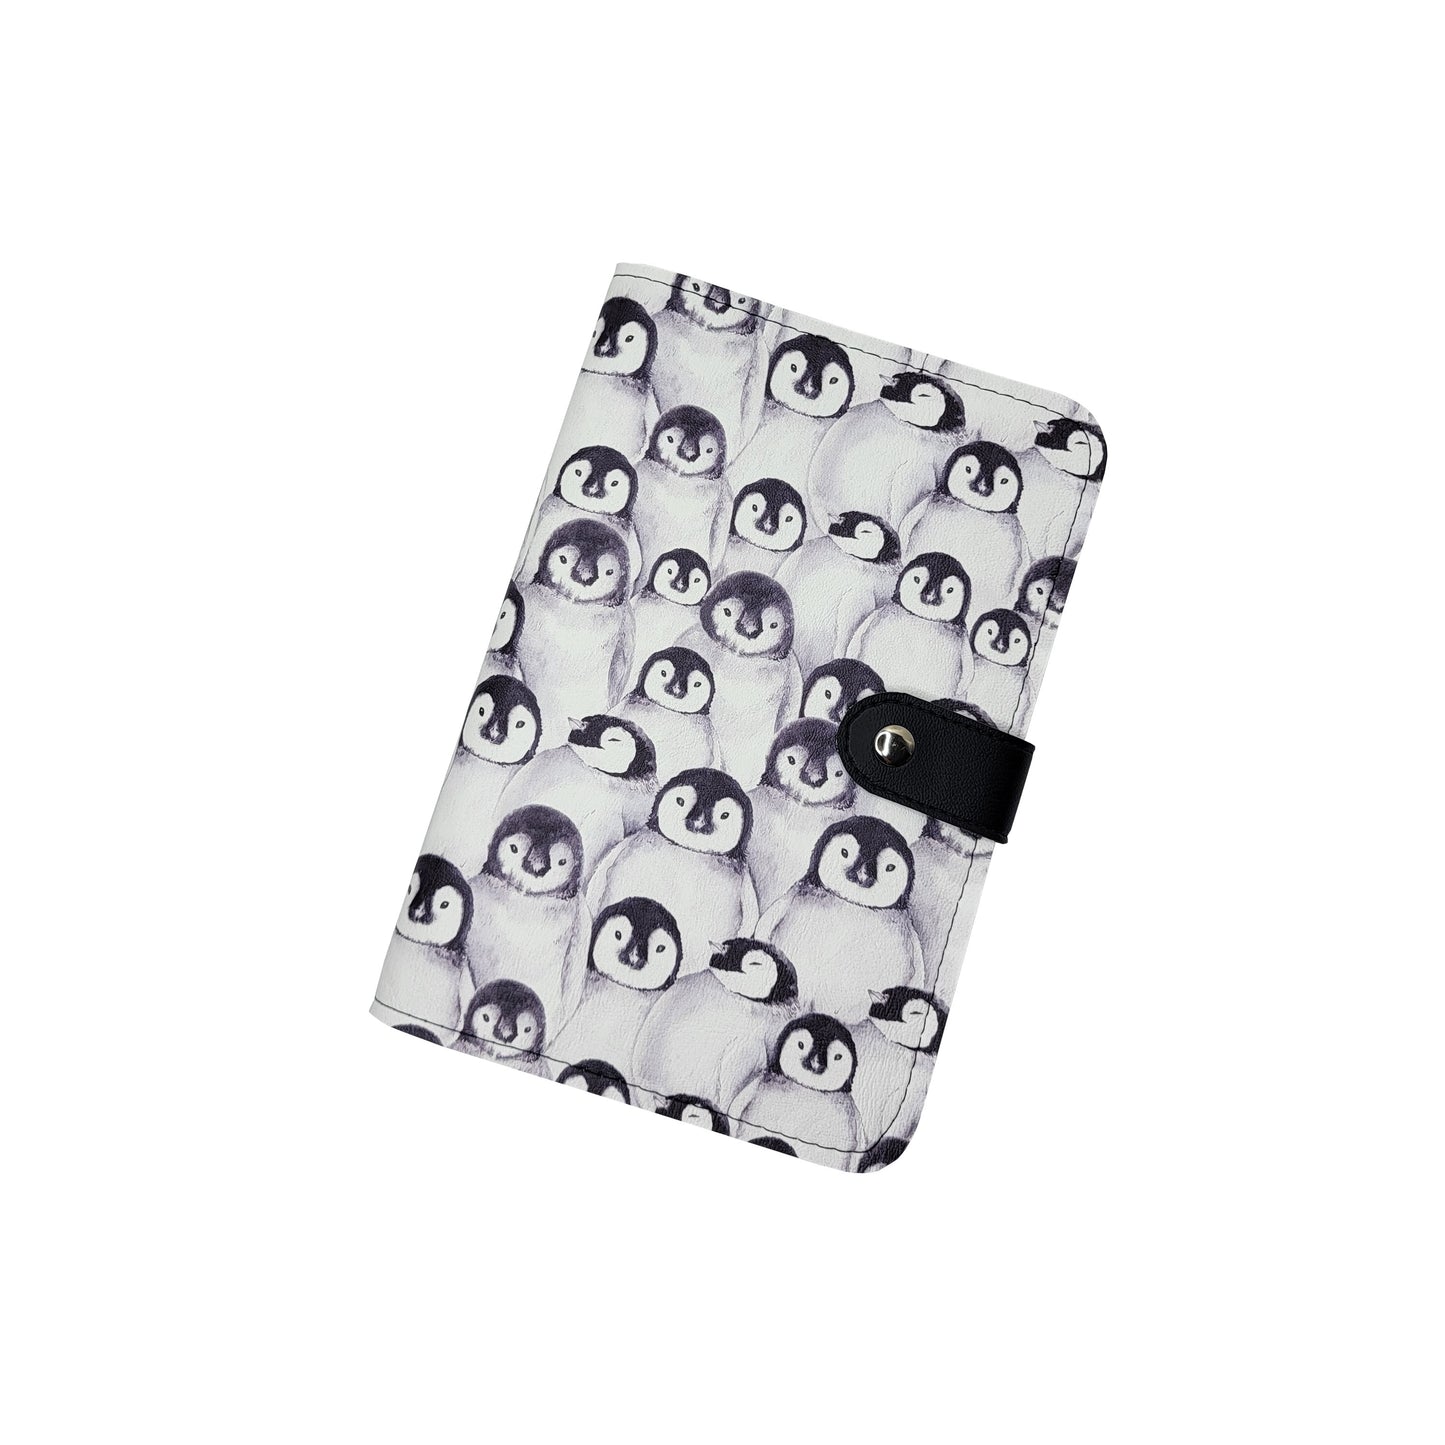 Penguin- Notebook & Cover